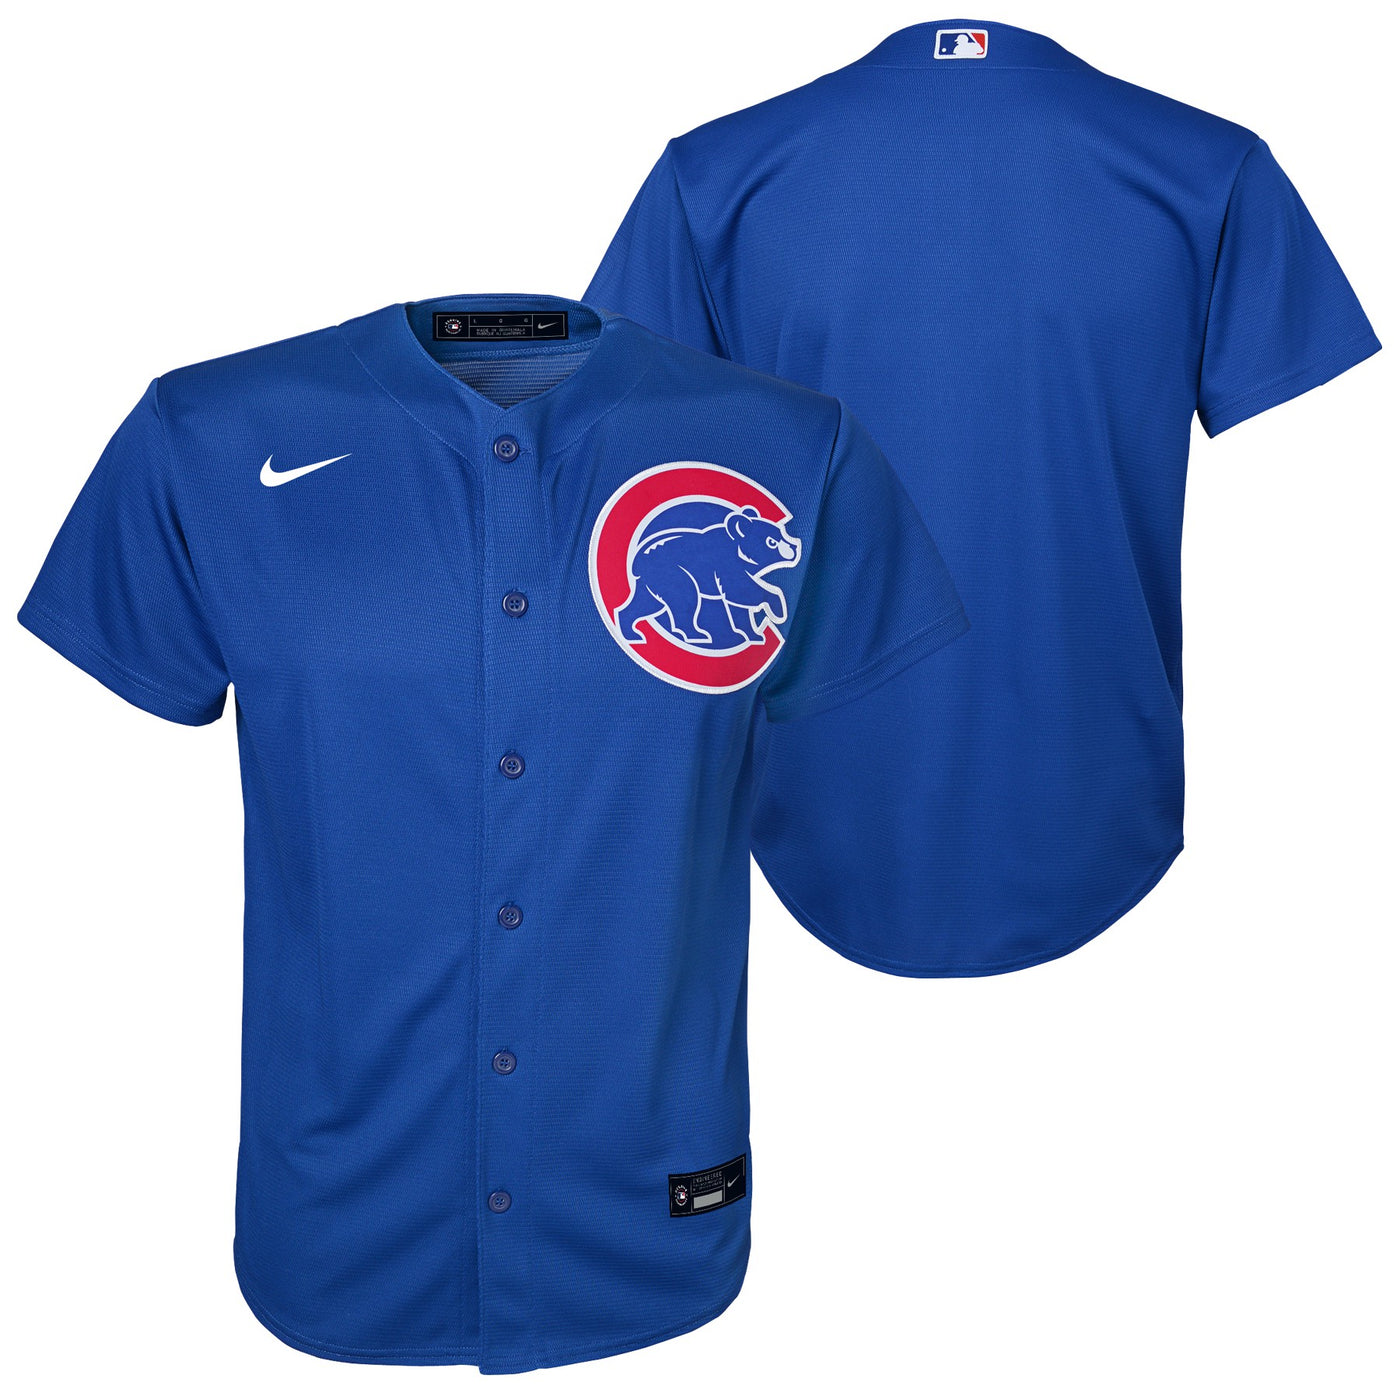 CHICAGO CUBS NIKE YOUTH ALTERNATE ROYAL BLUE JERSEY